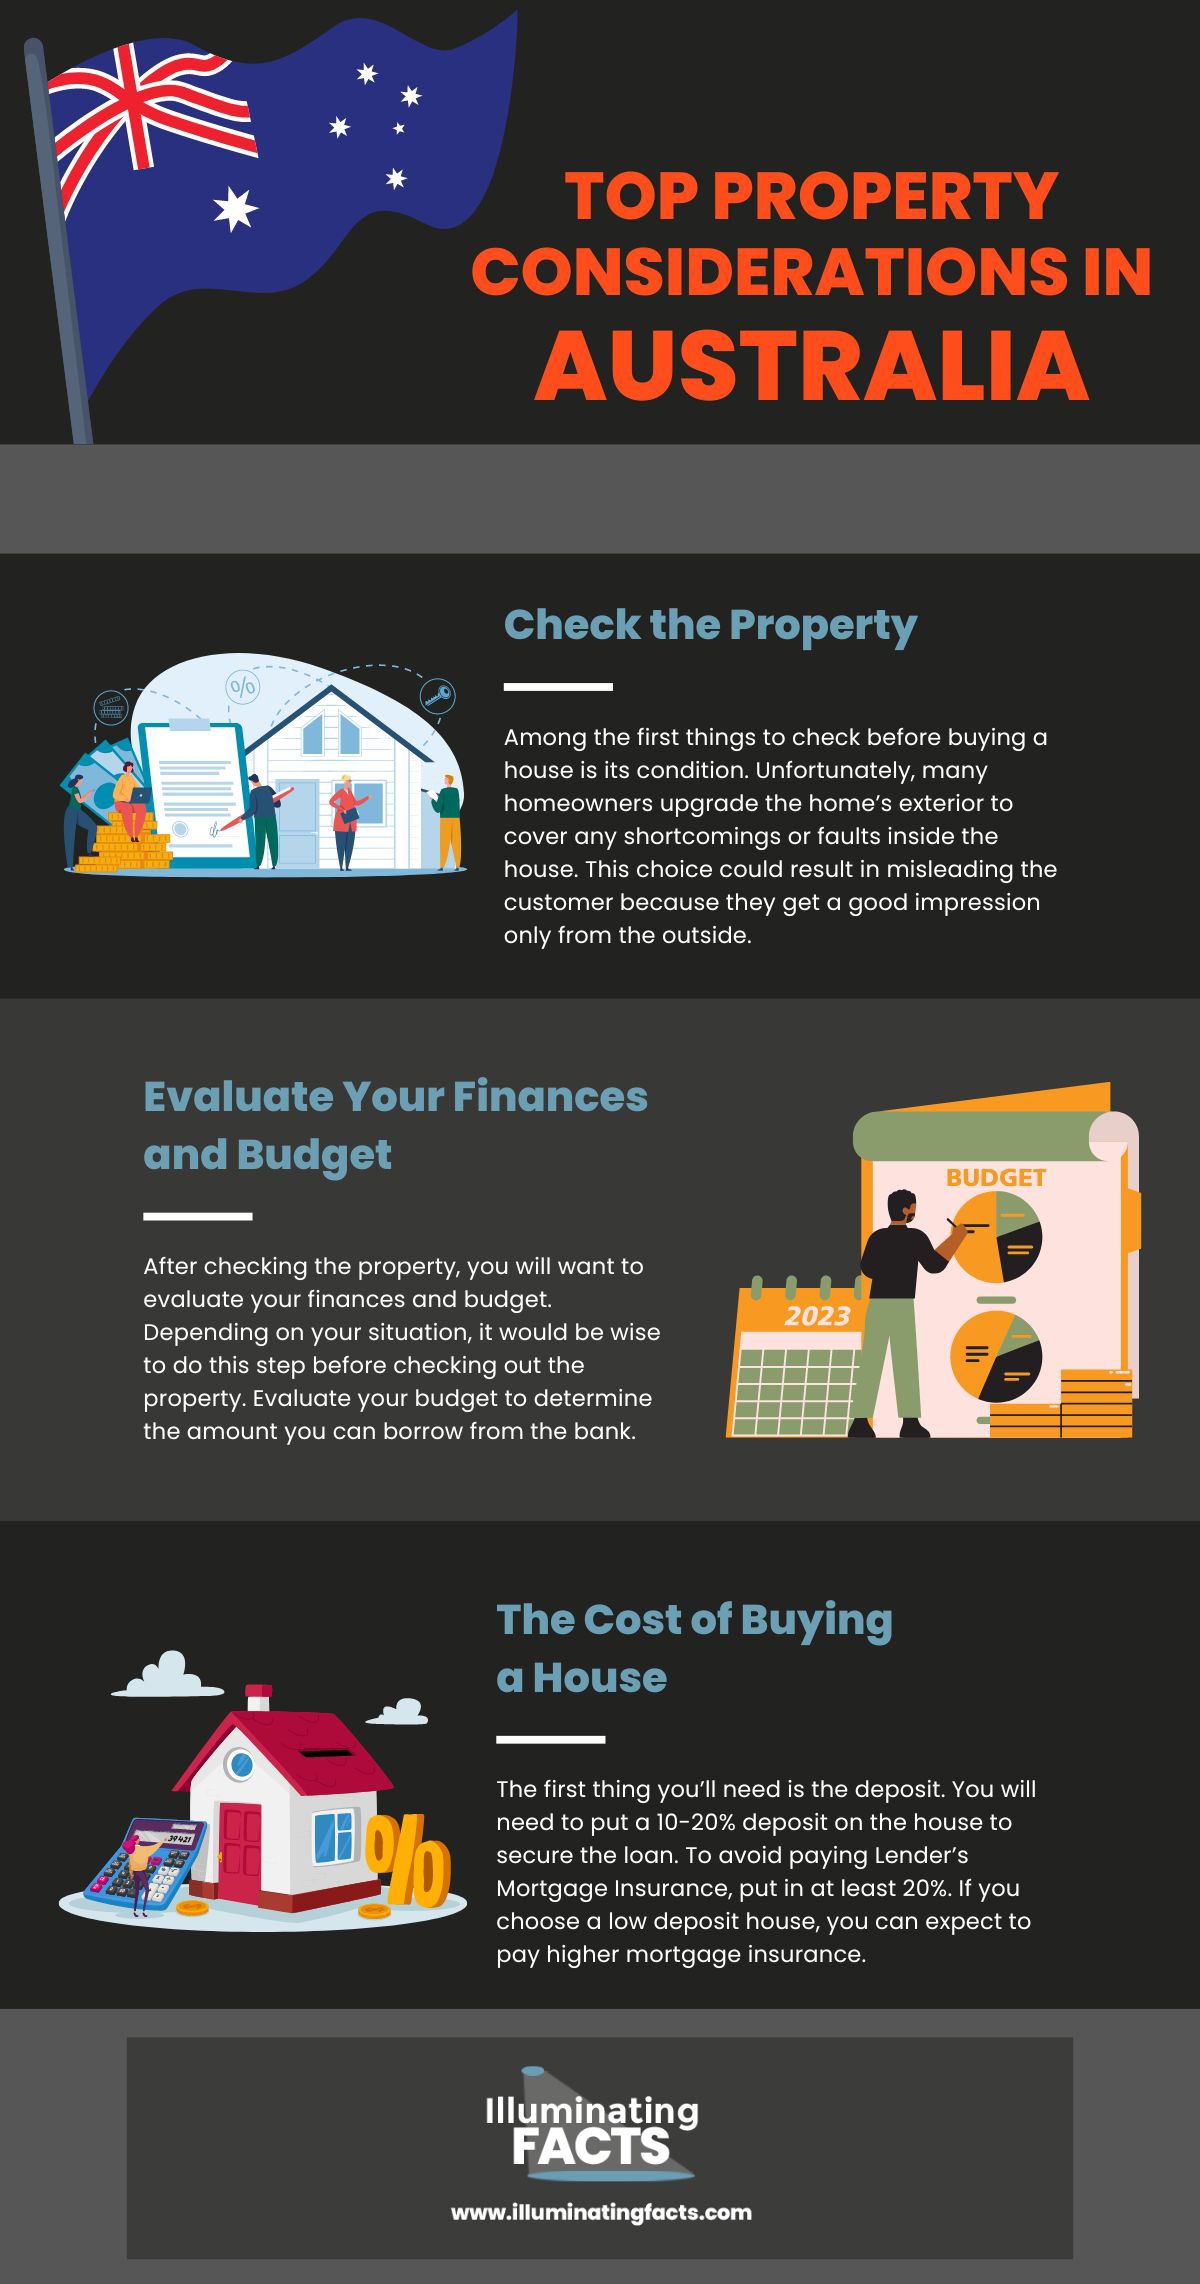 Top Property Considerations in Australia